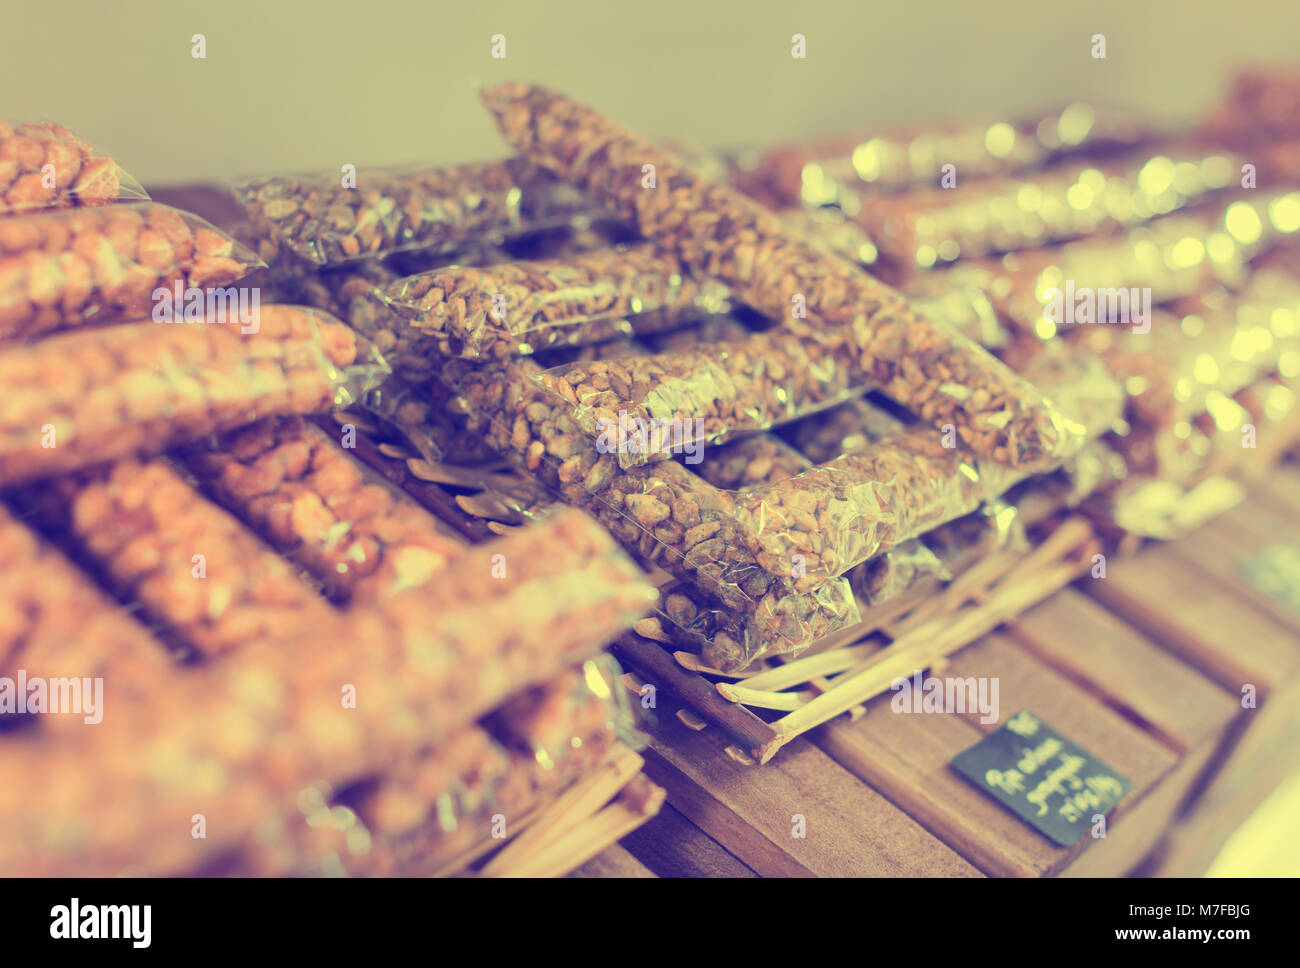 Photo of bags with dried fruits and nuts in the alimentacion store. Stock Photo